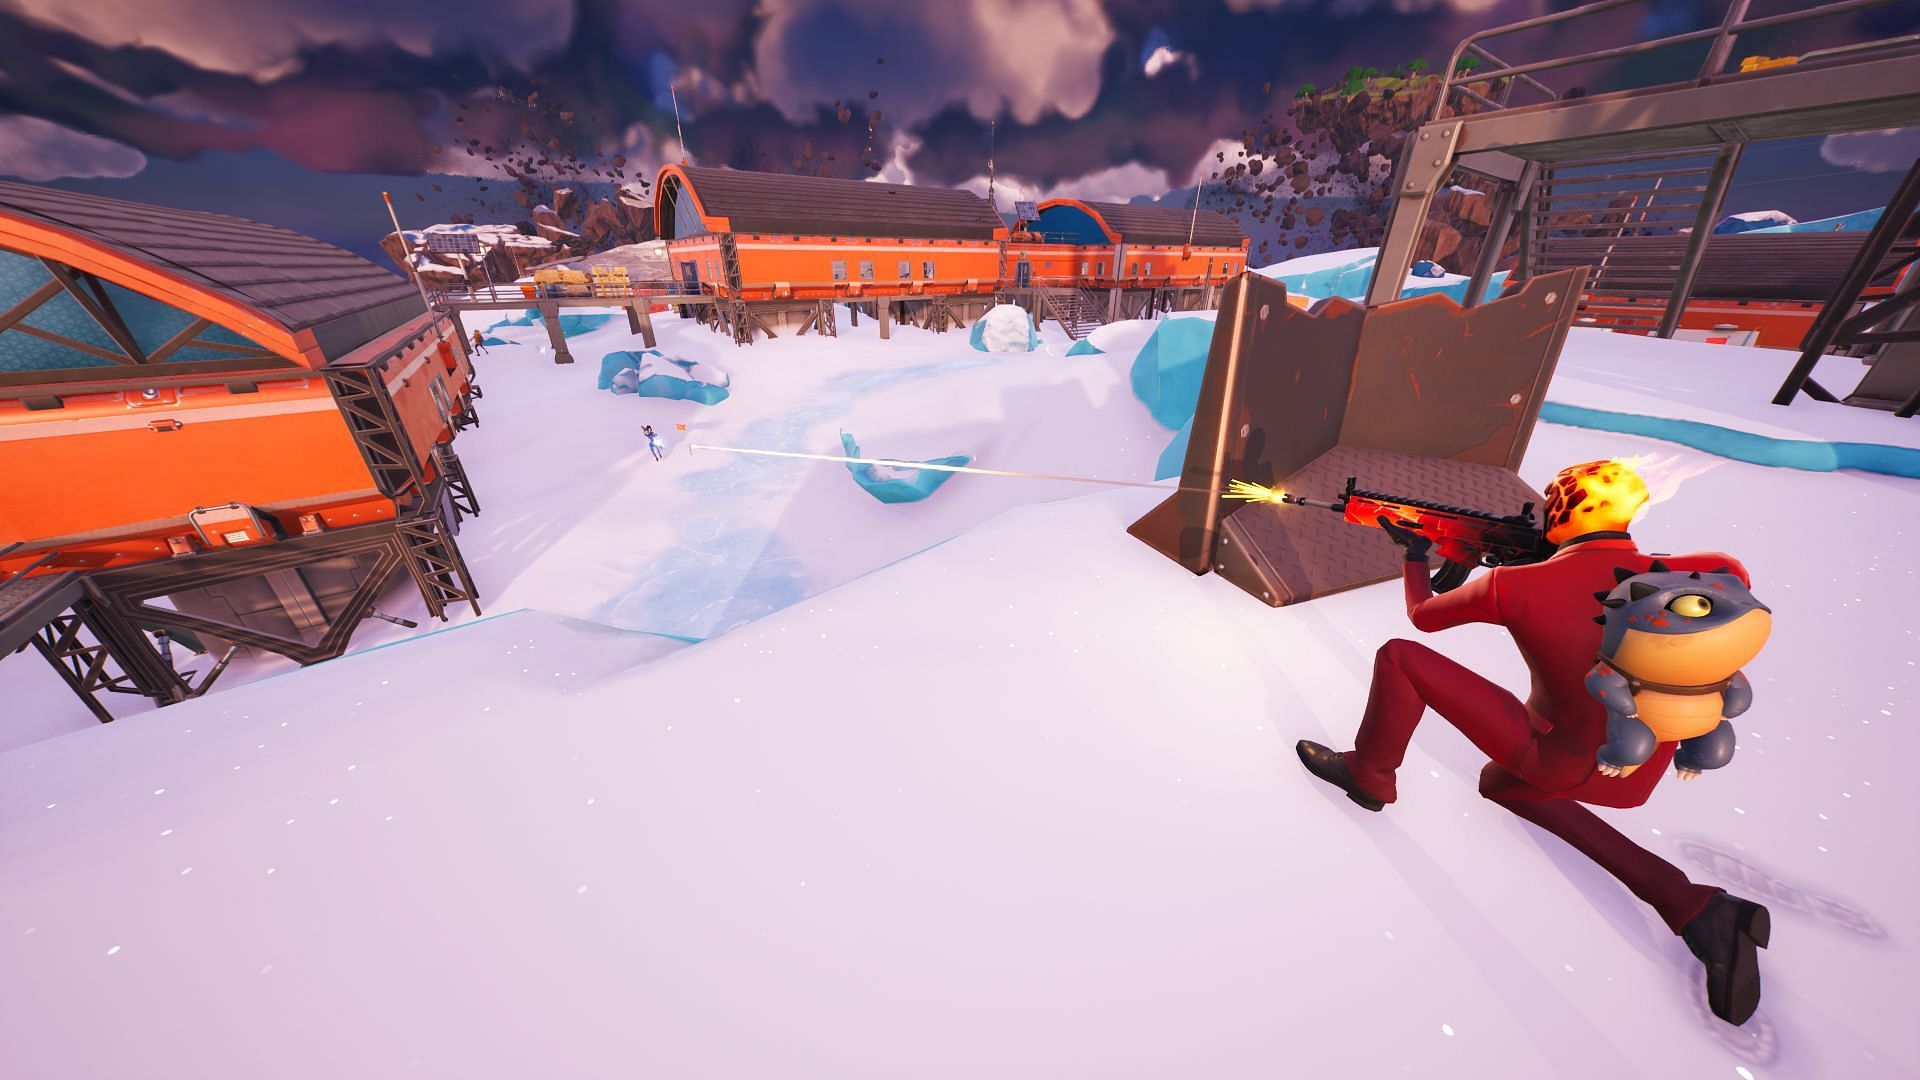 Look for high ground when adopting a stationary firing position (Image via Epic Games/Fortnite)